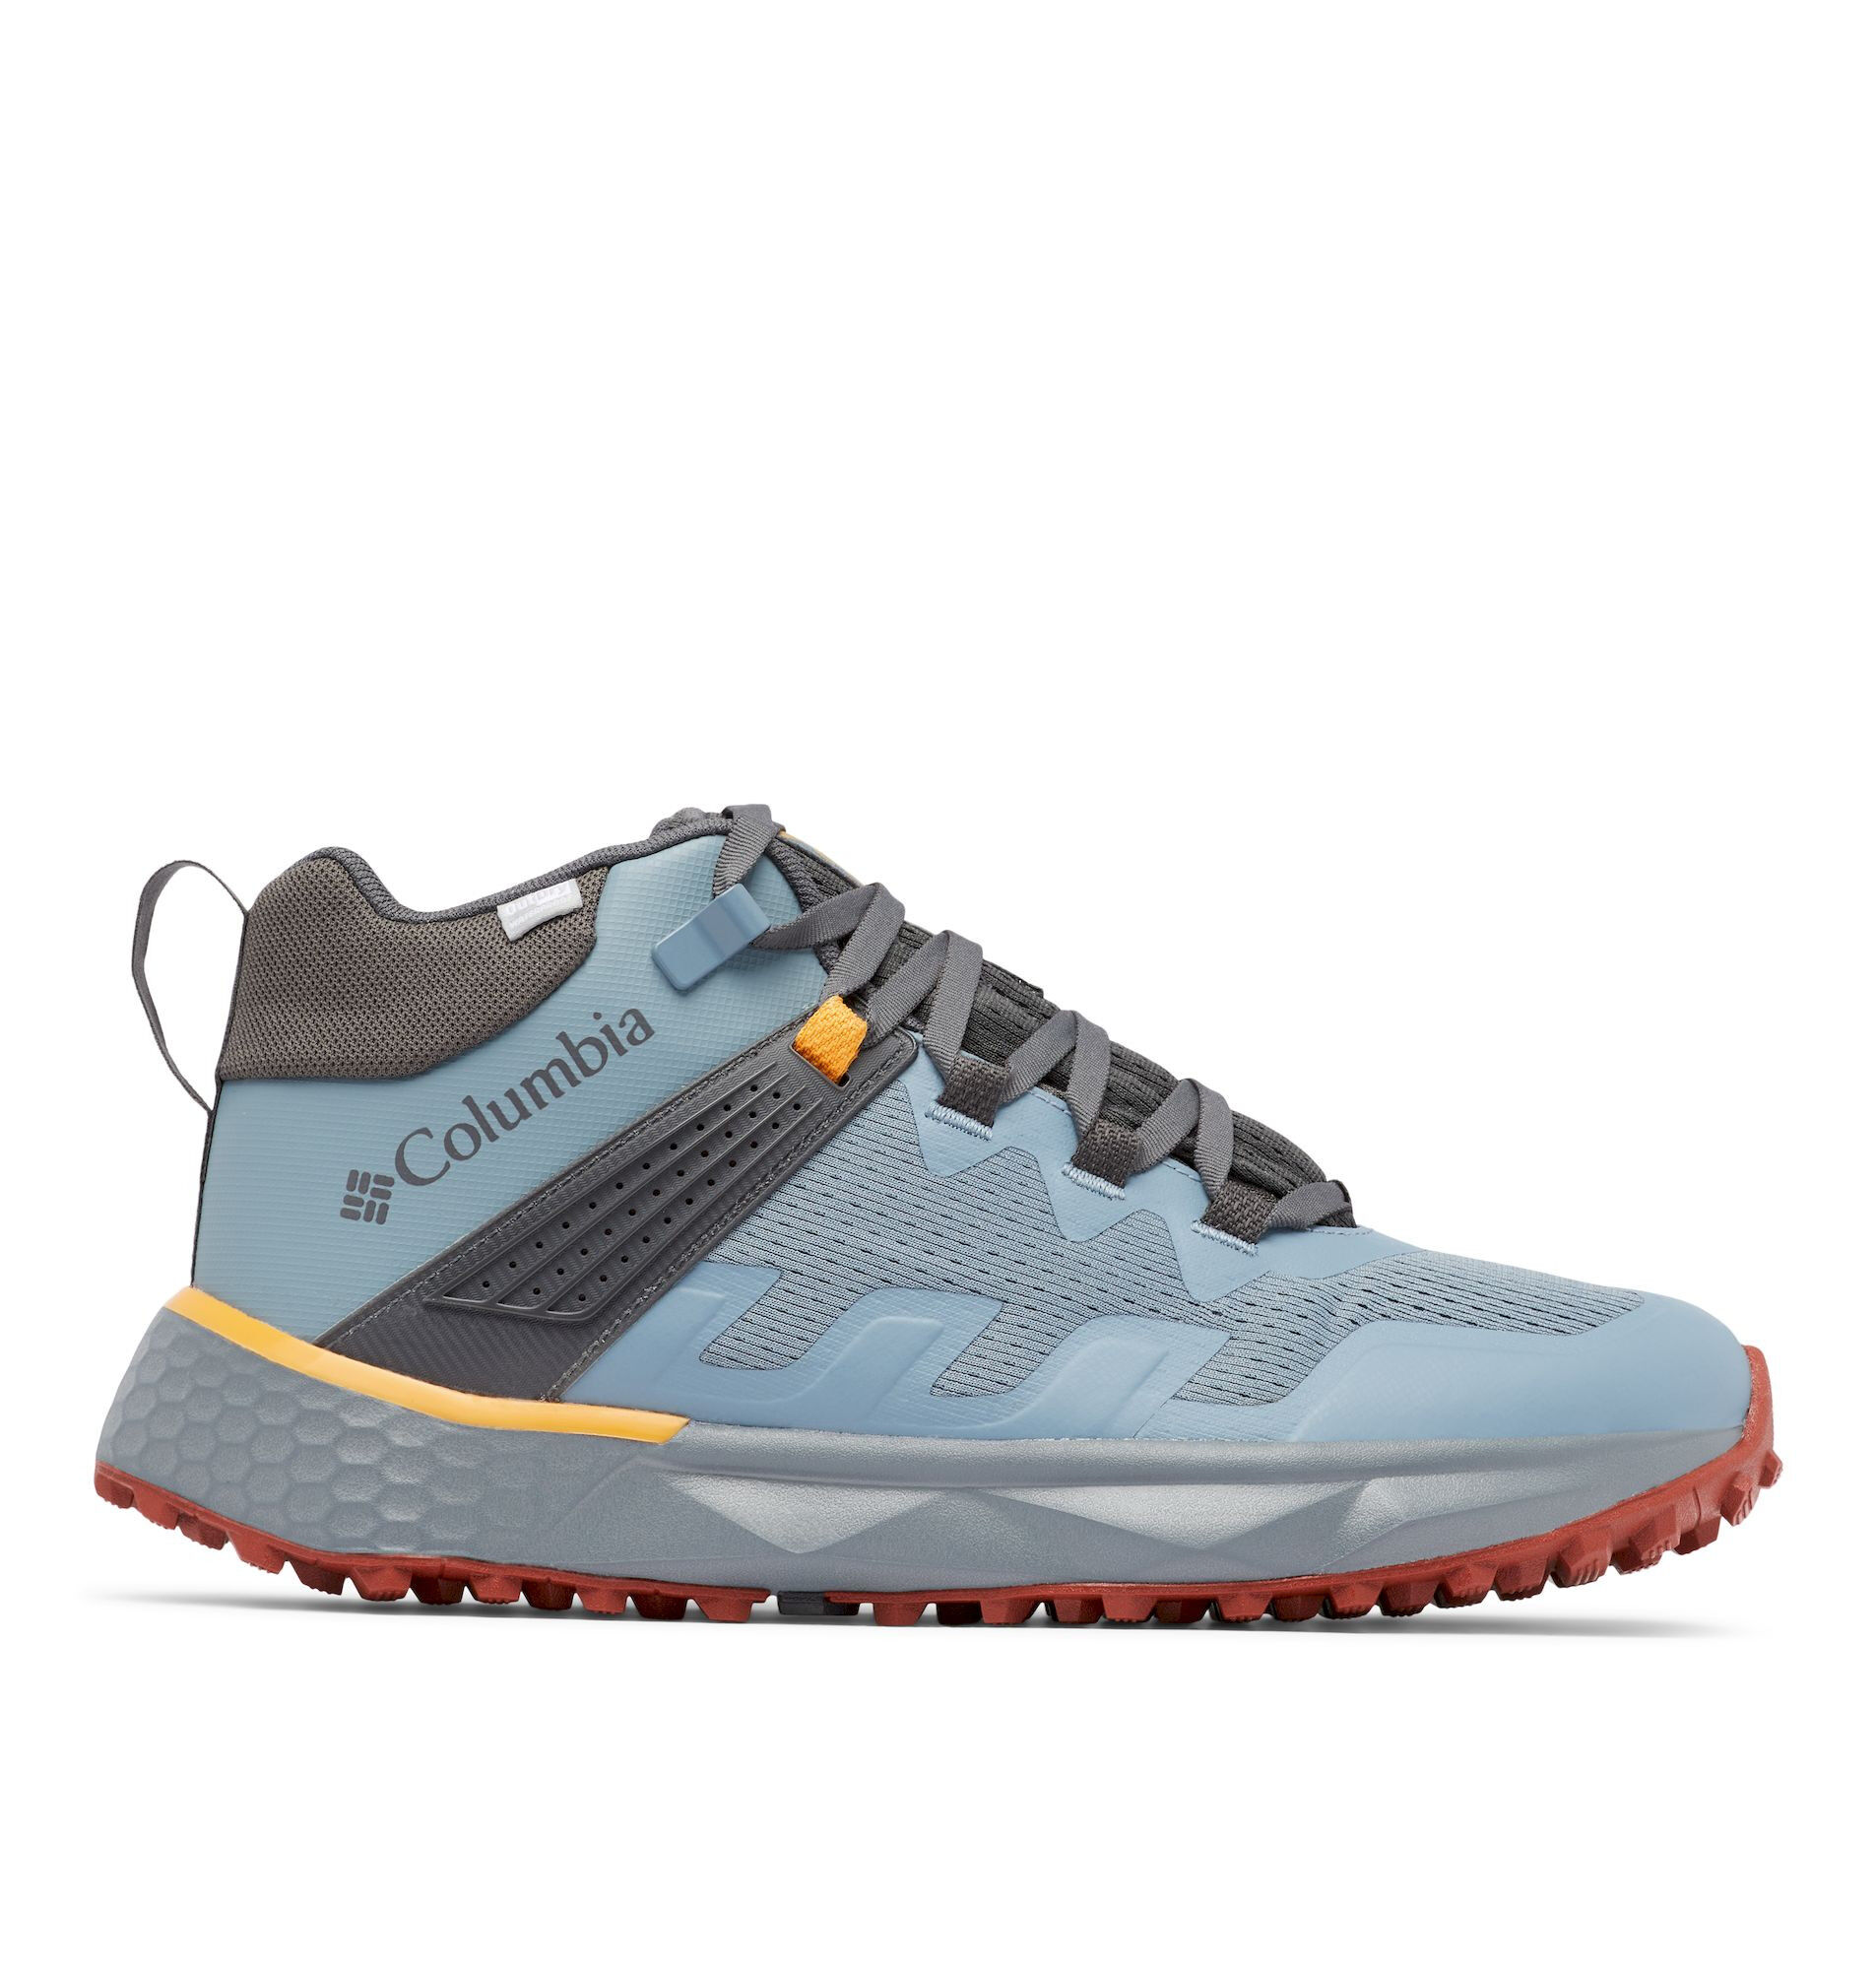 Columbia Facet 75 Mid OutDry - Lifestyle shoes - Men's | Hardloop